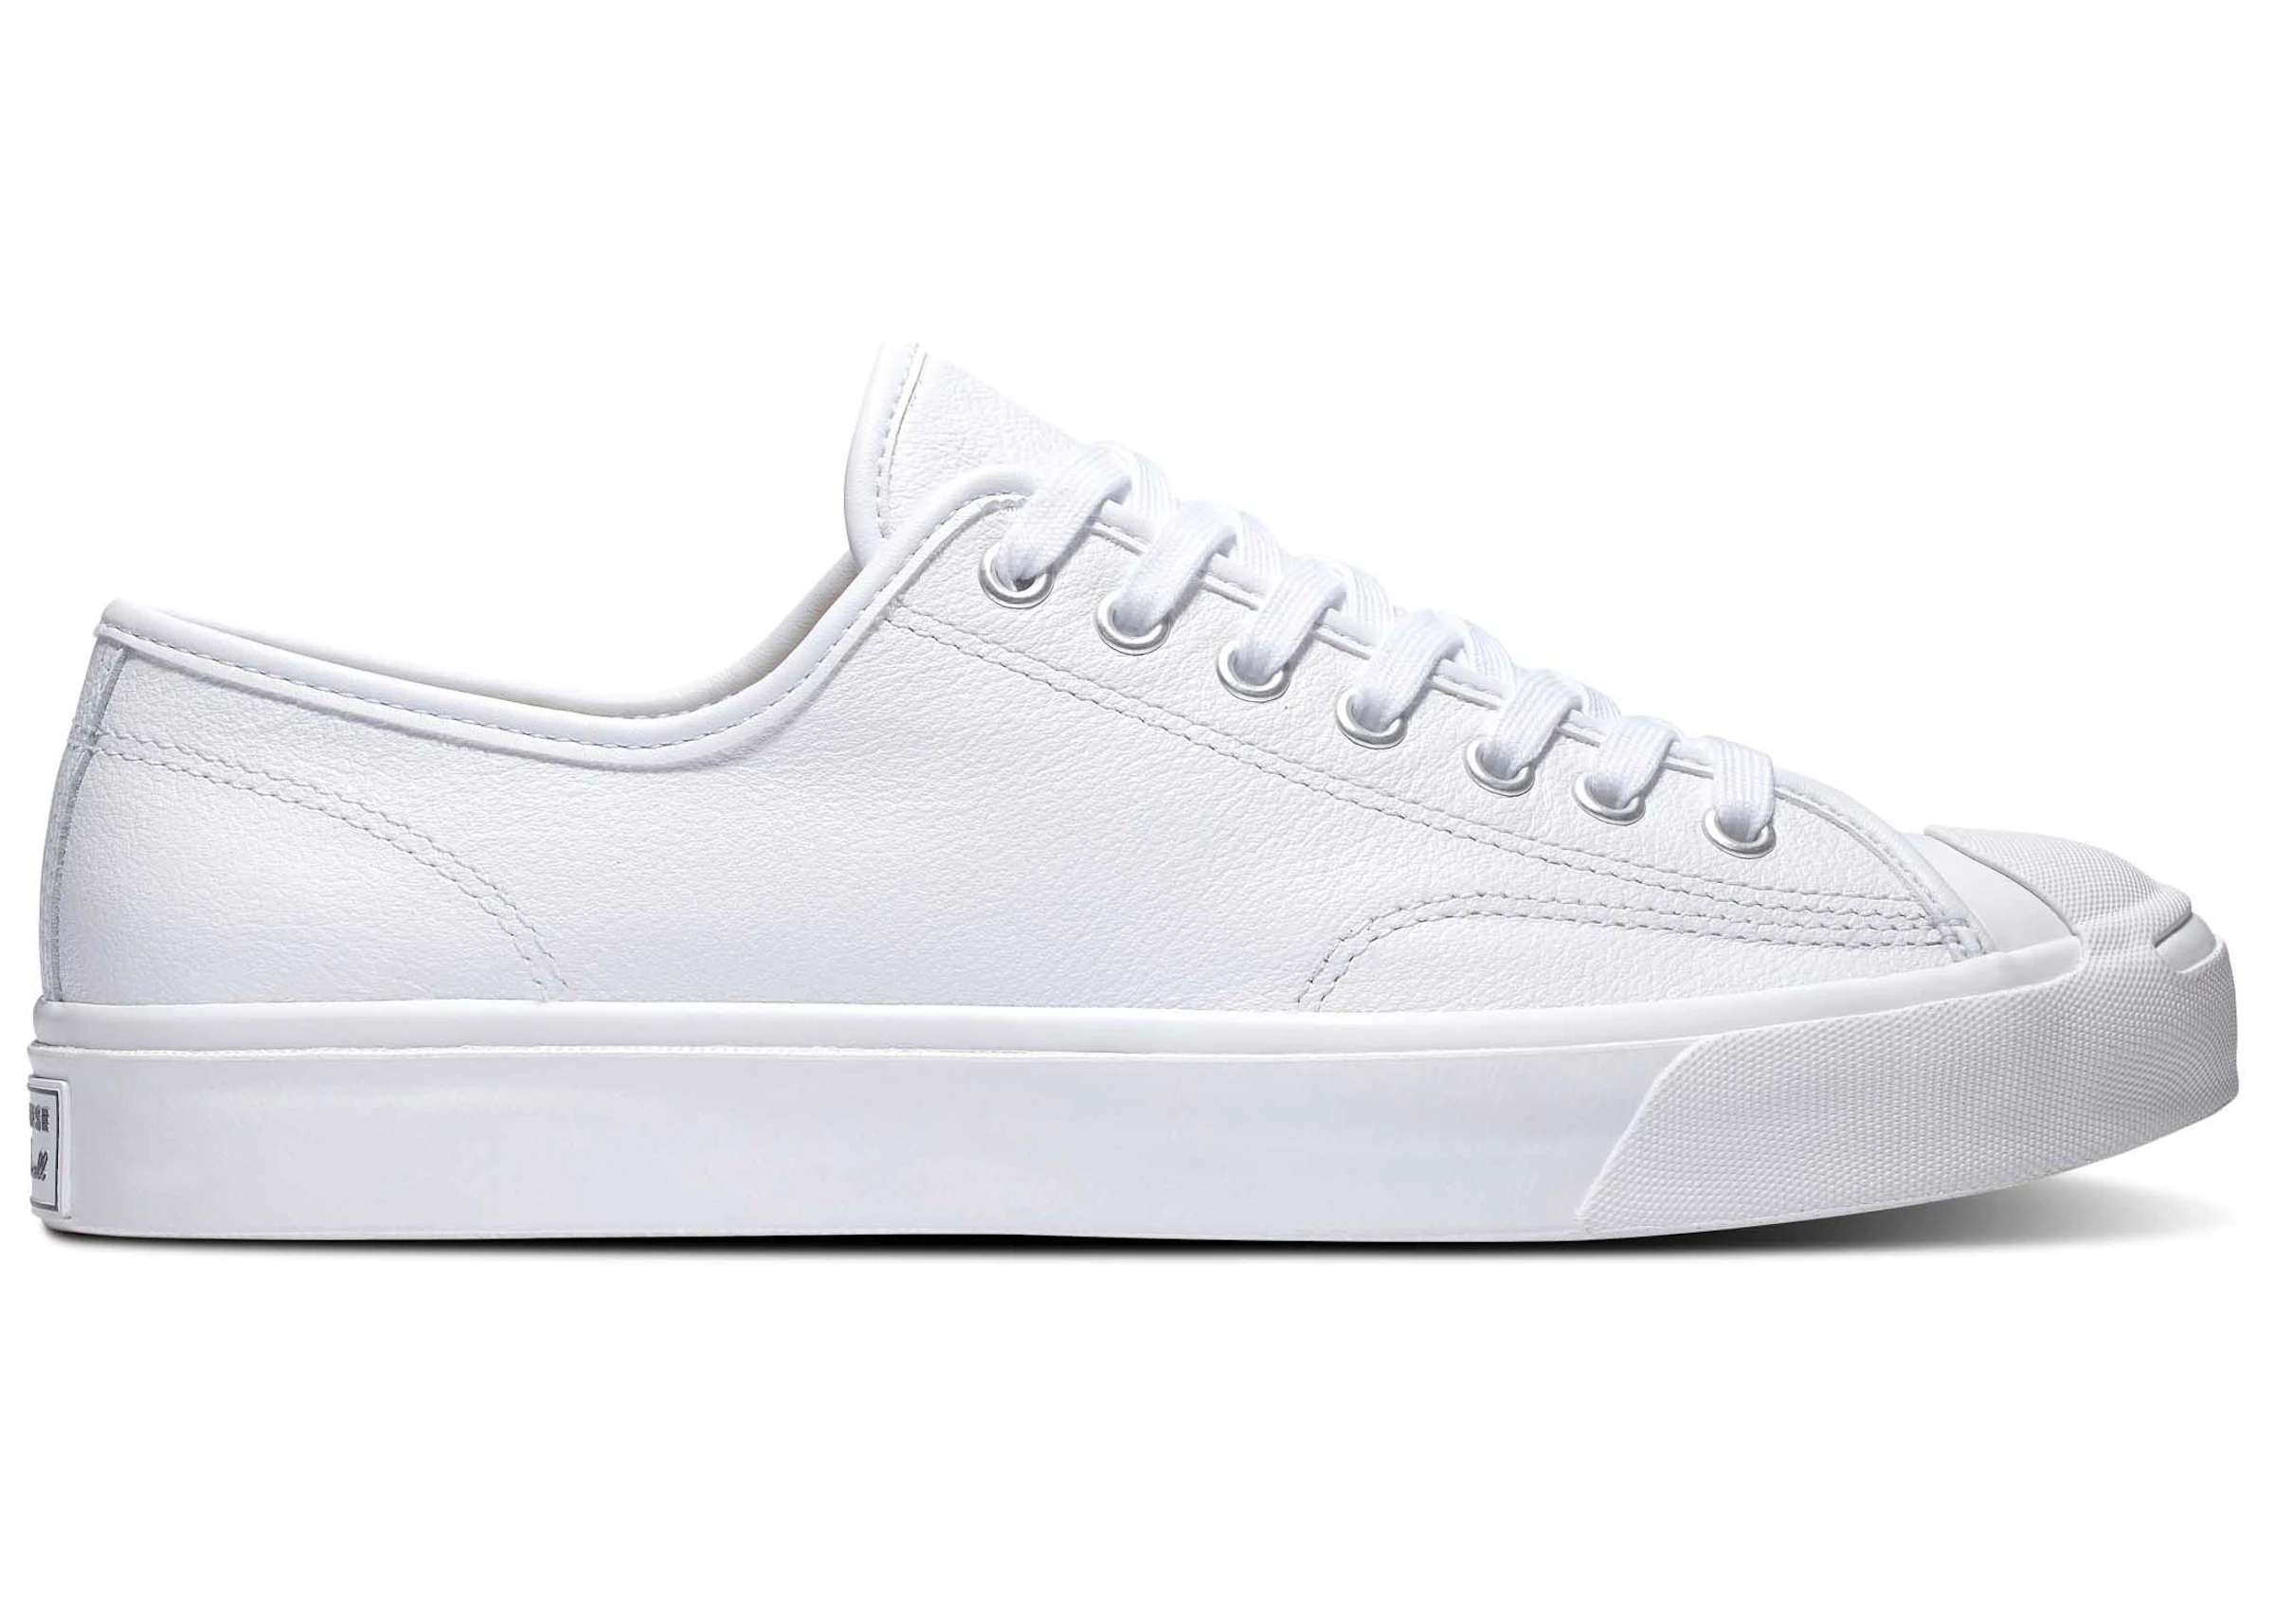 Converse Jack Purcell White - 164225C - US